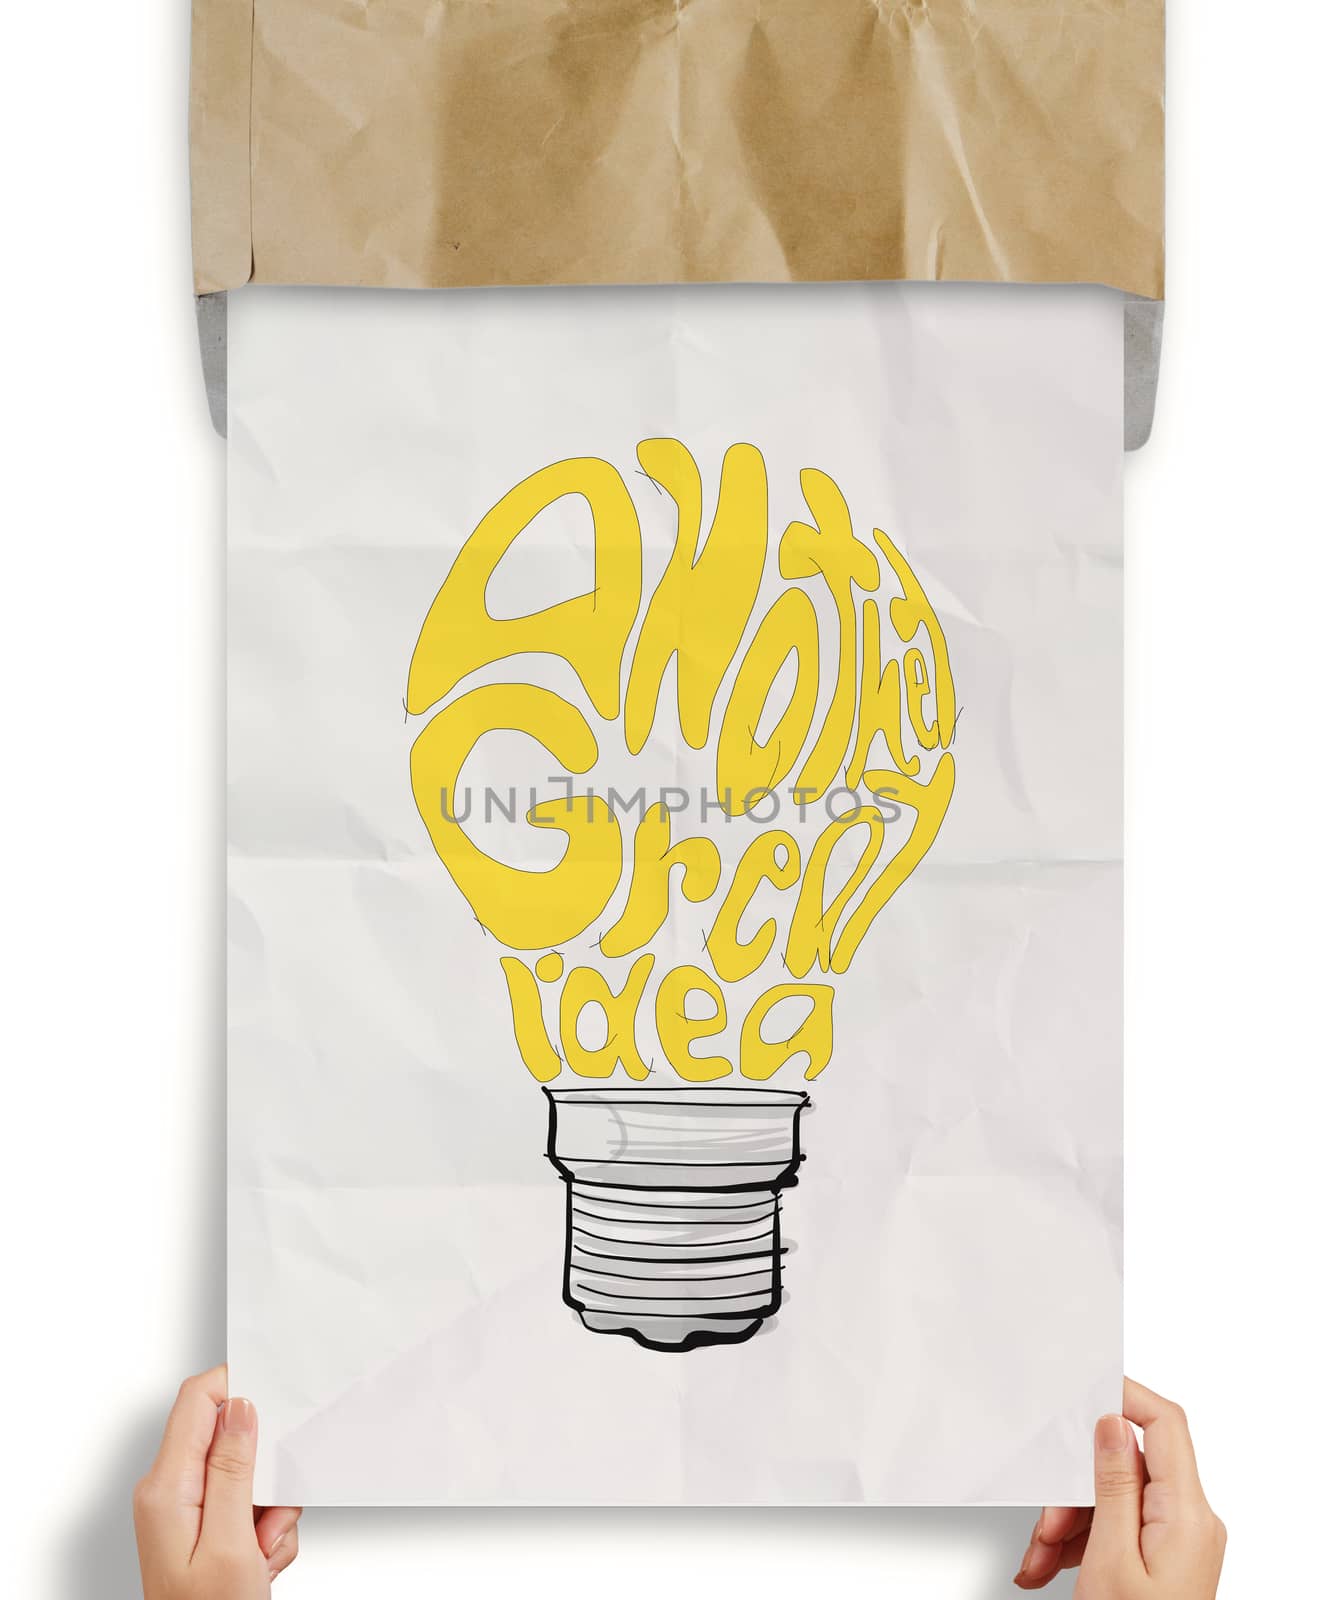 light bulb crumpled paper in another great idea words as creative concept